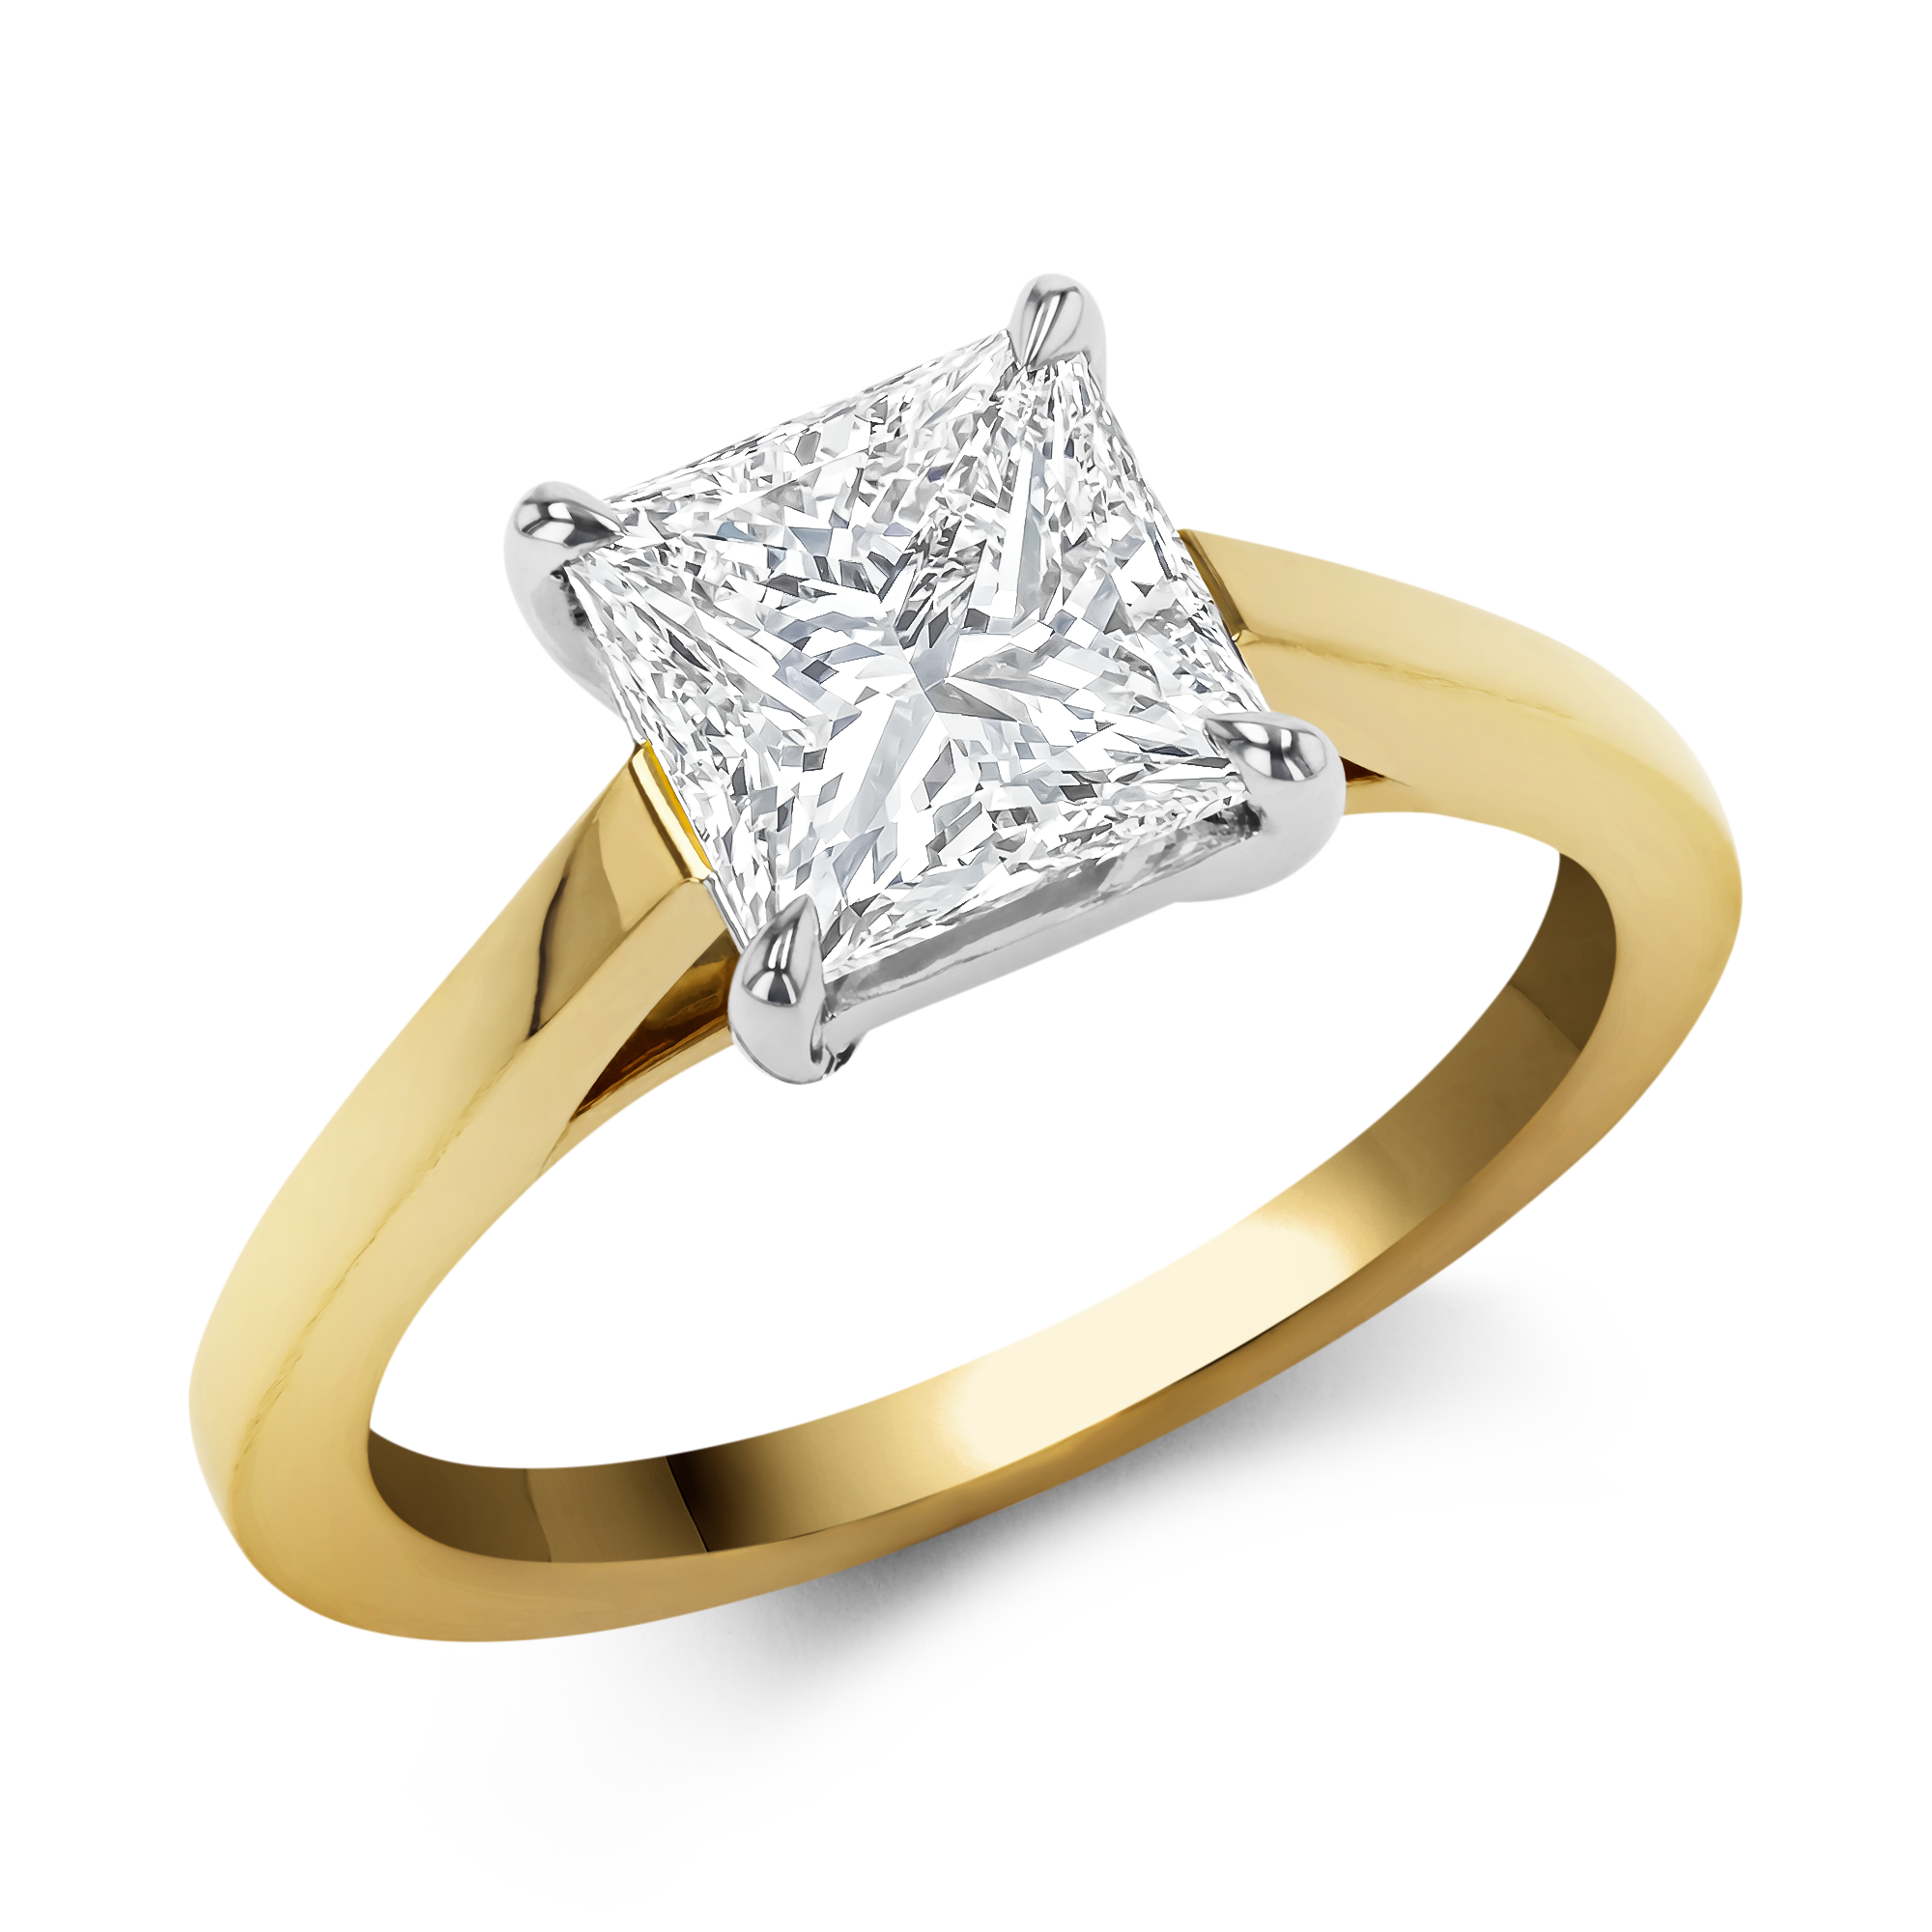 Classic 2.01ct Diamond Solitaire Ring Princess Cut, Claw Set_1